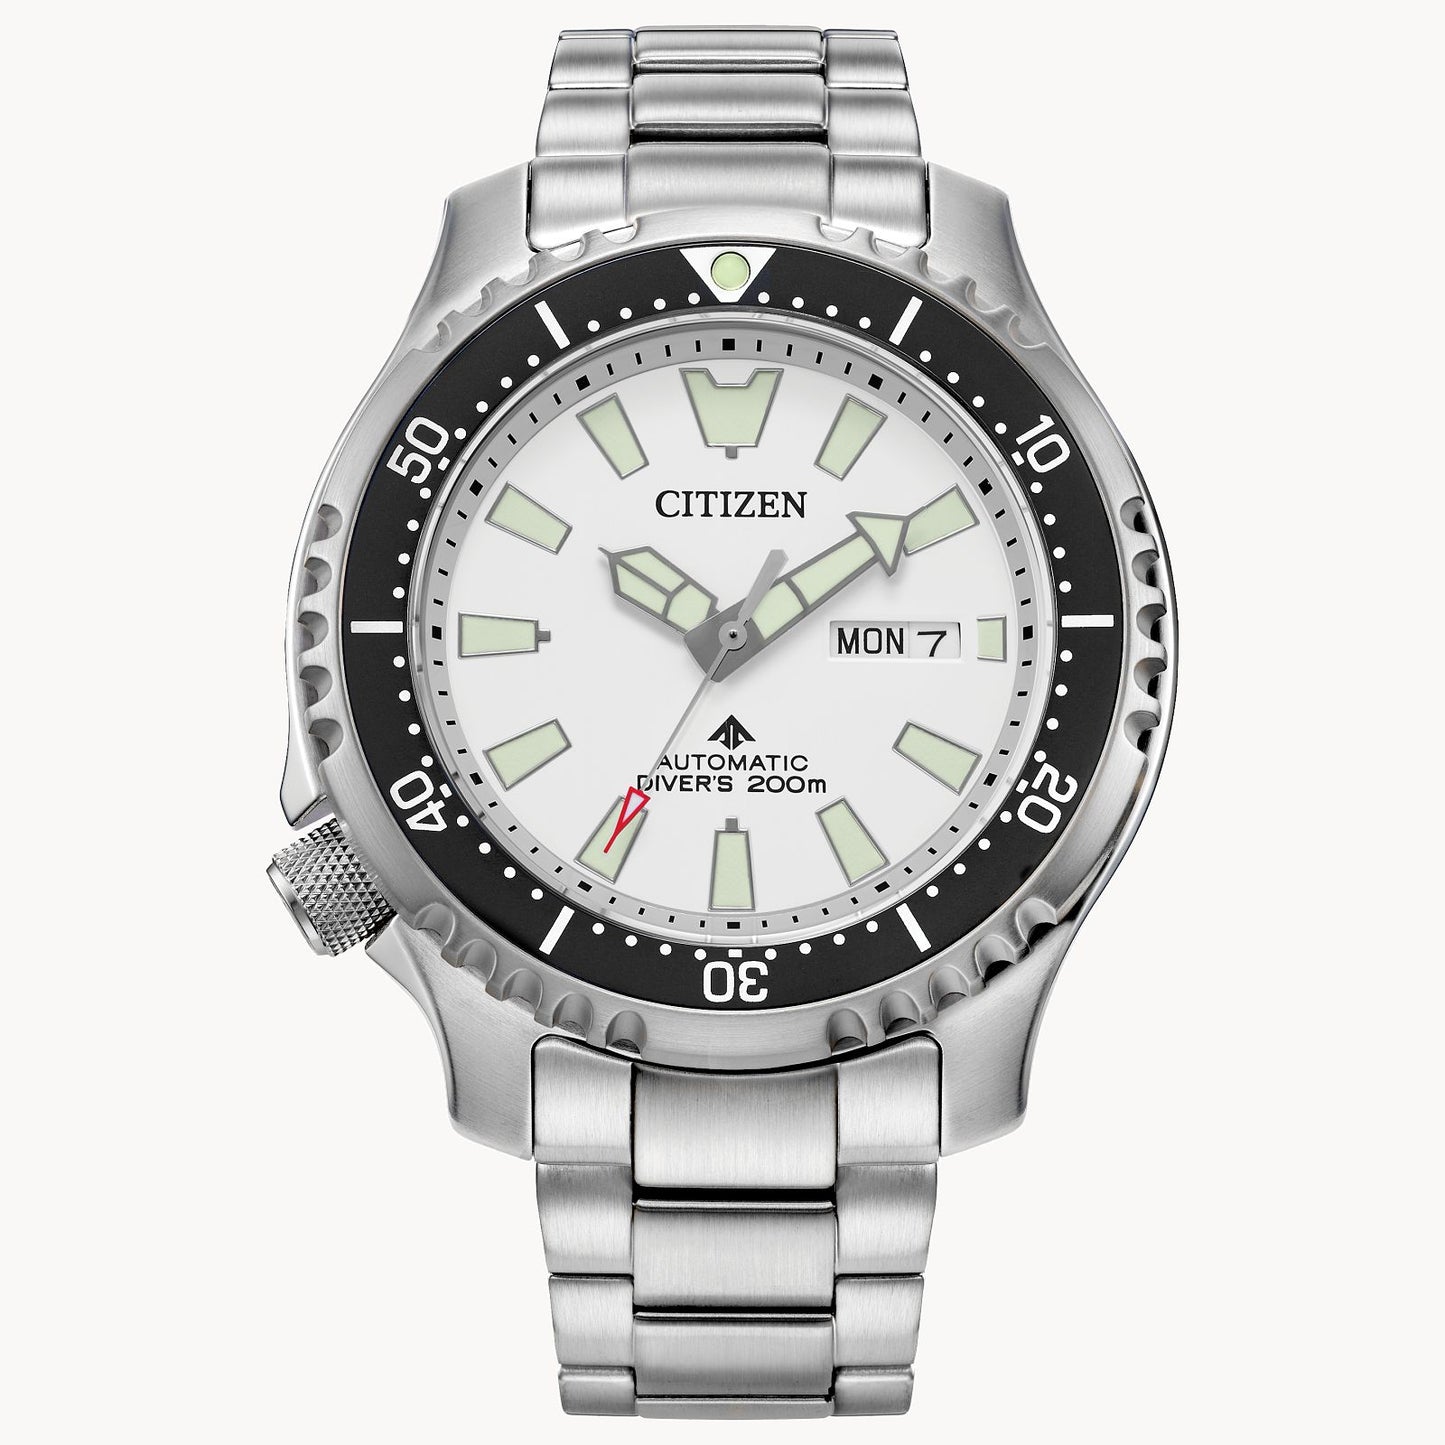 Load image into Gallery viewer, Promaster Dive Automatic Citizen Watch NY0150-51A
